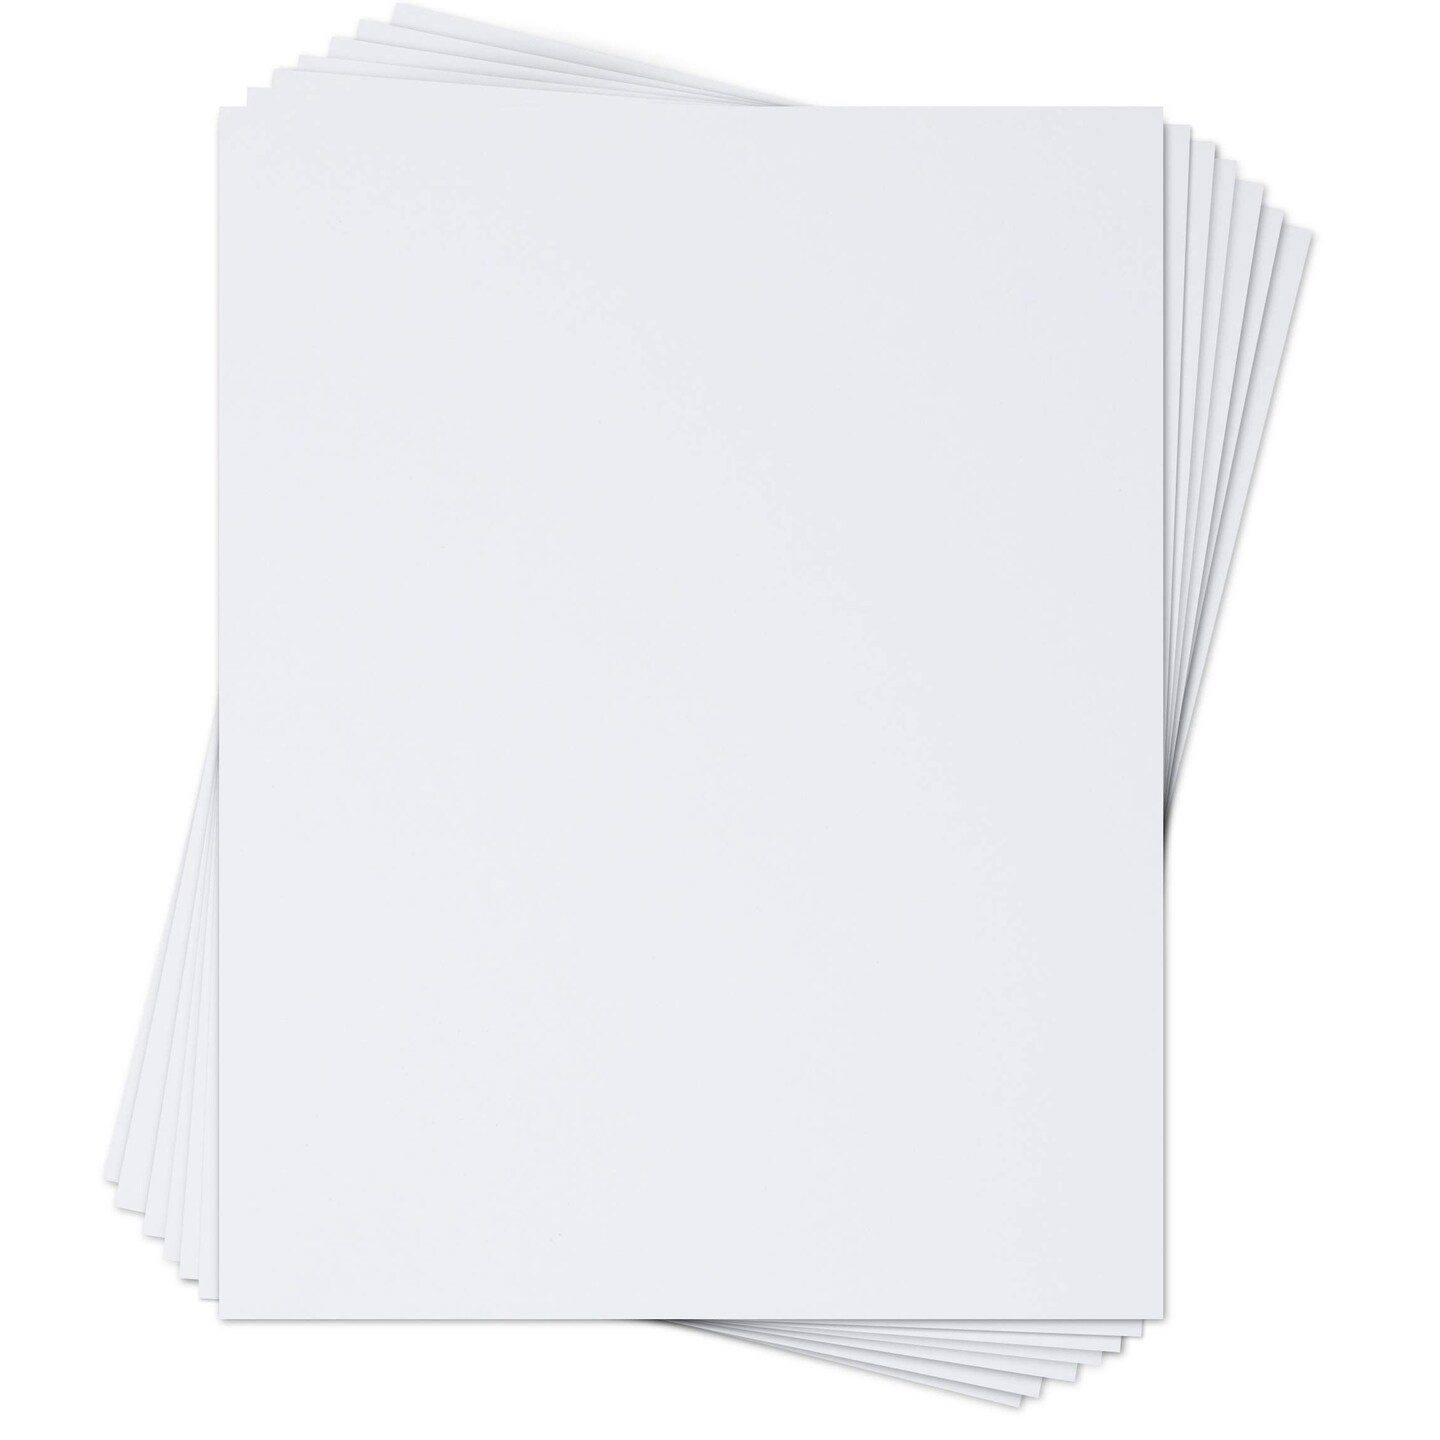 Mat Board Center, White Backing Boards - Full Sheet - for Art, Prints,  Photos, Prints and More, 10 Pack, 11x14